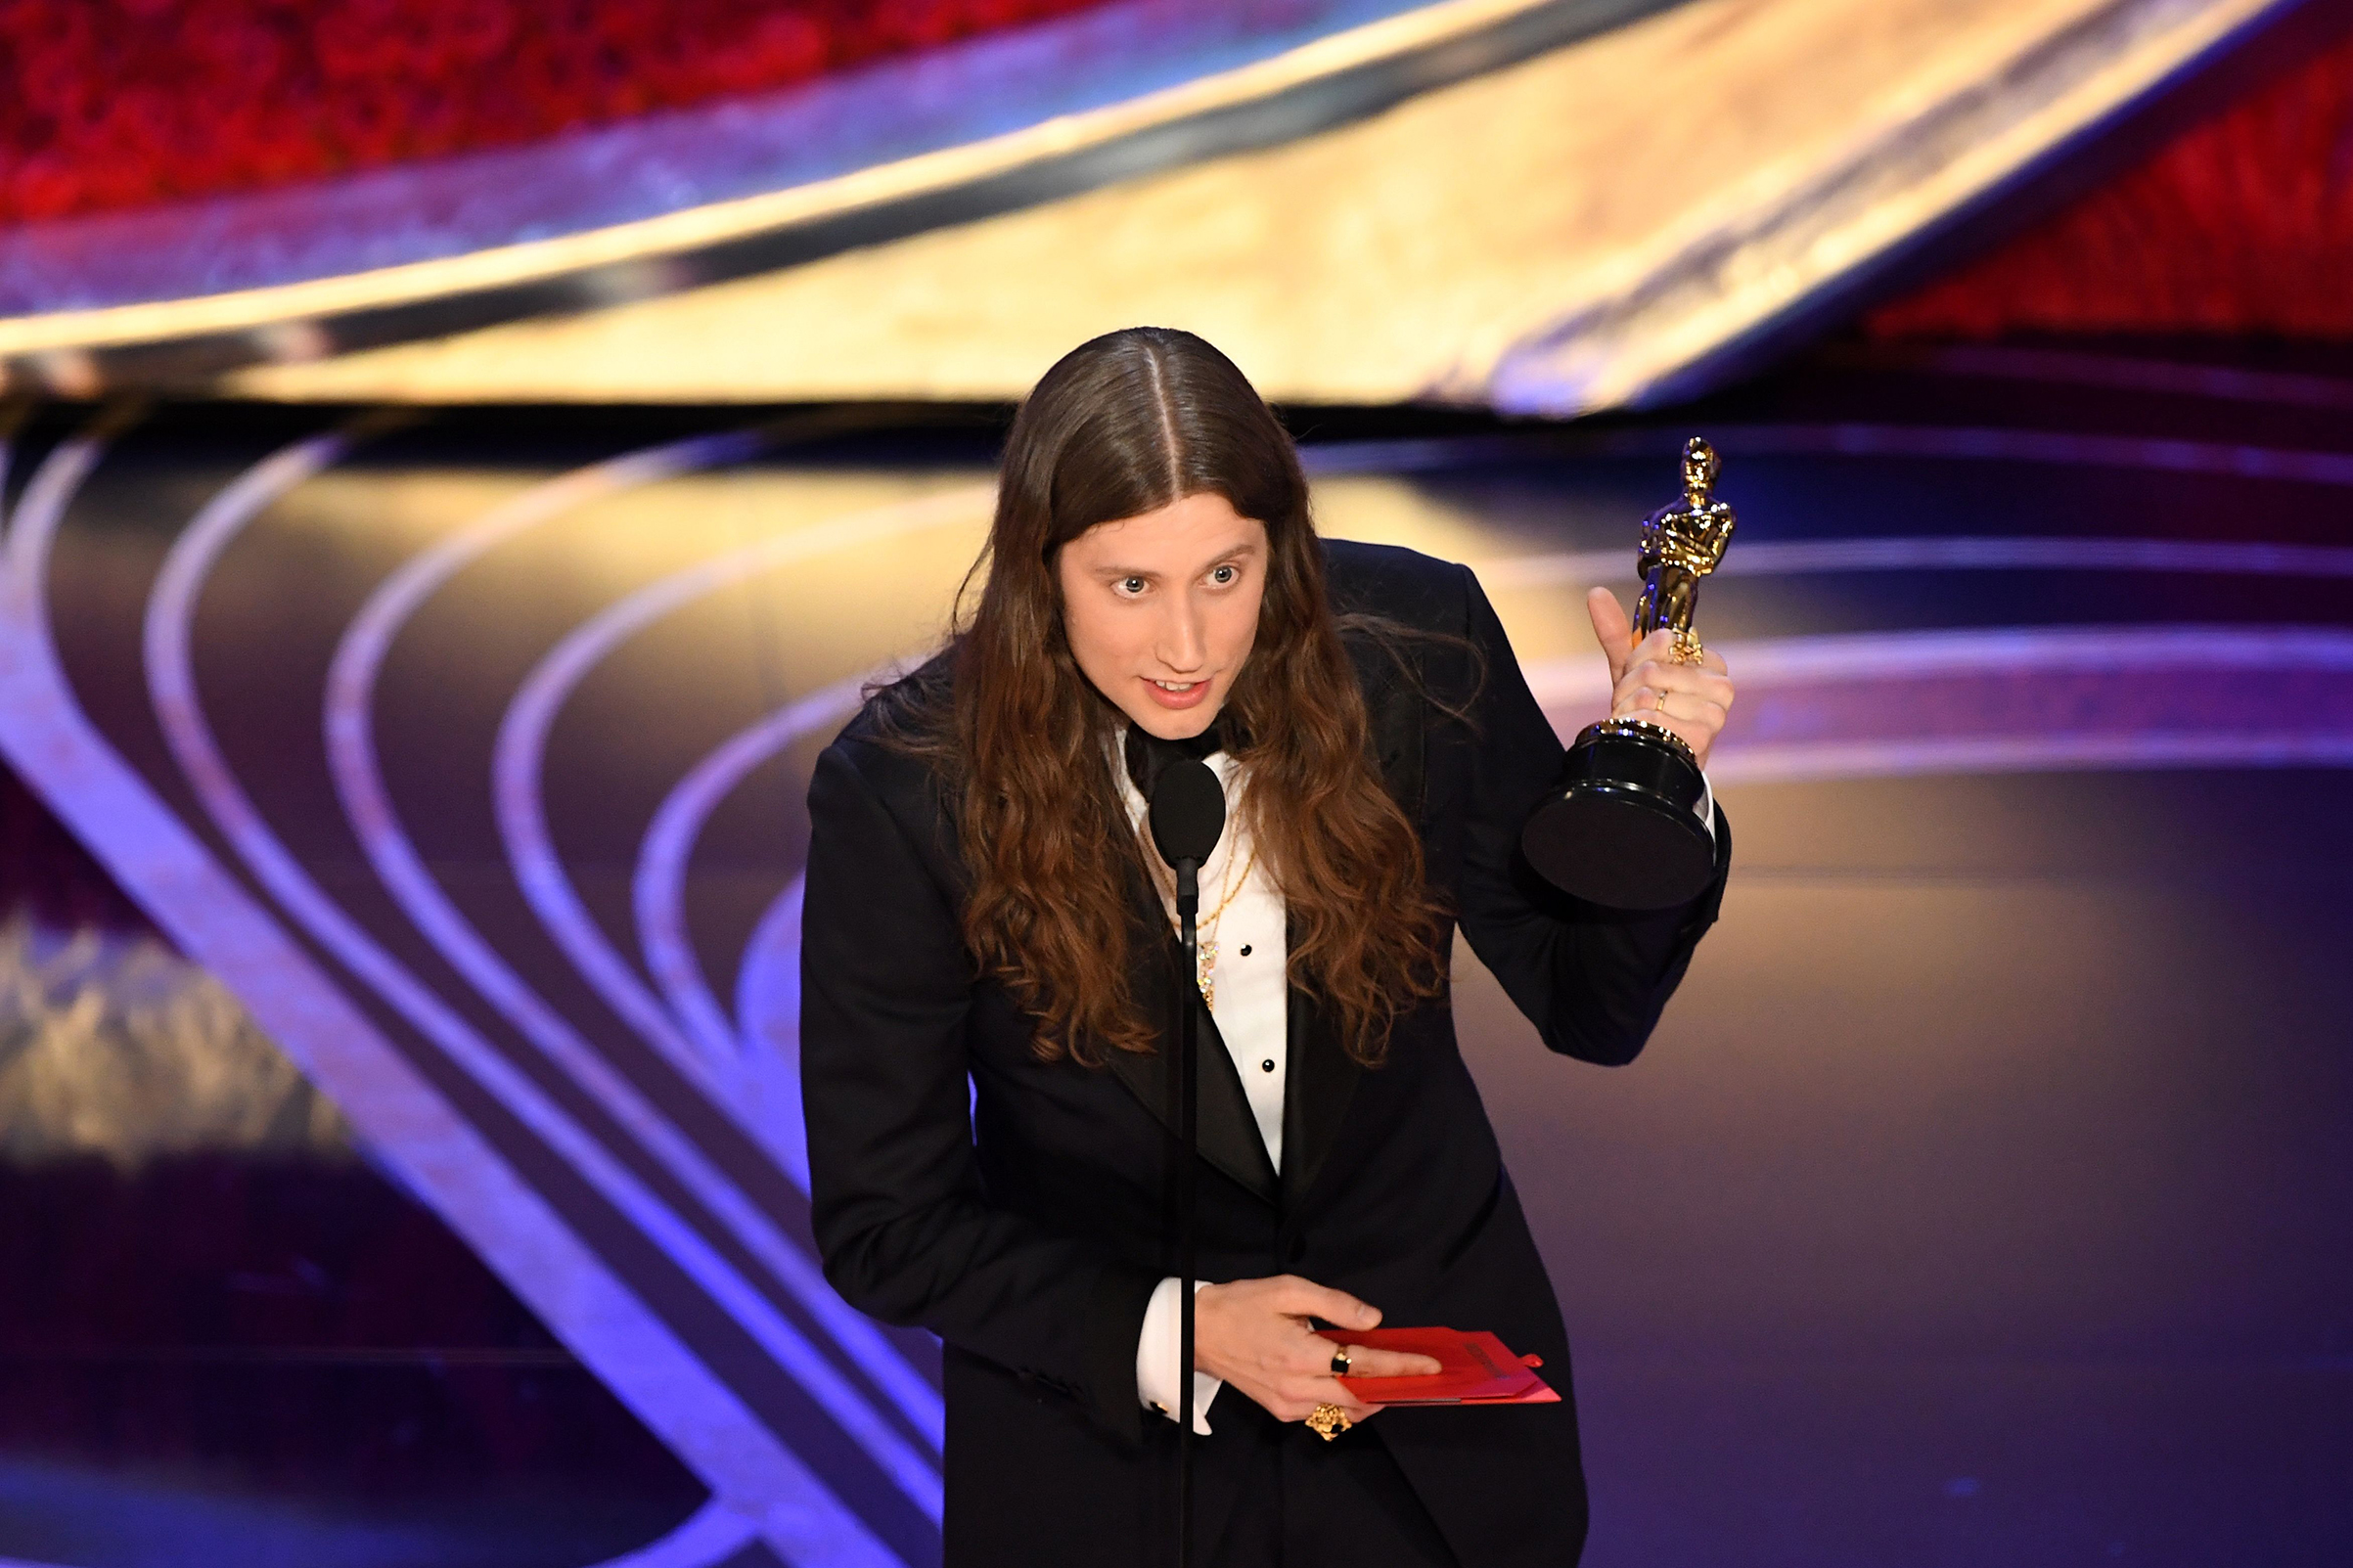 Best Original Score nominee for "Black Panther" composer Ludwig Goransson accepts the award for Best Original Score during the 91st Annual Academy Awards at the Dolby Theatre in Hollywood, California on Feb. 24, 2019. (VALERIE MACON—AFP/Getty Images)